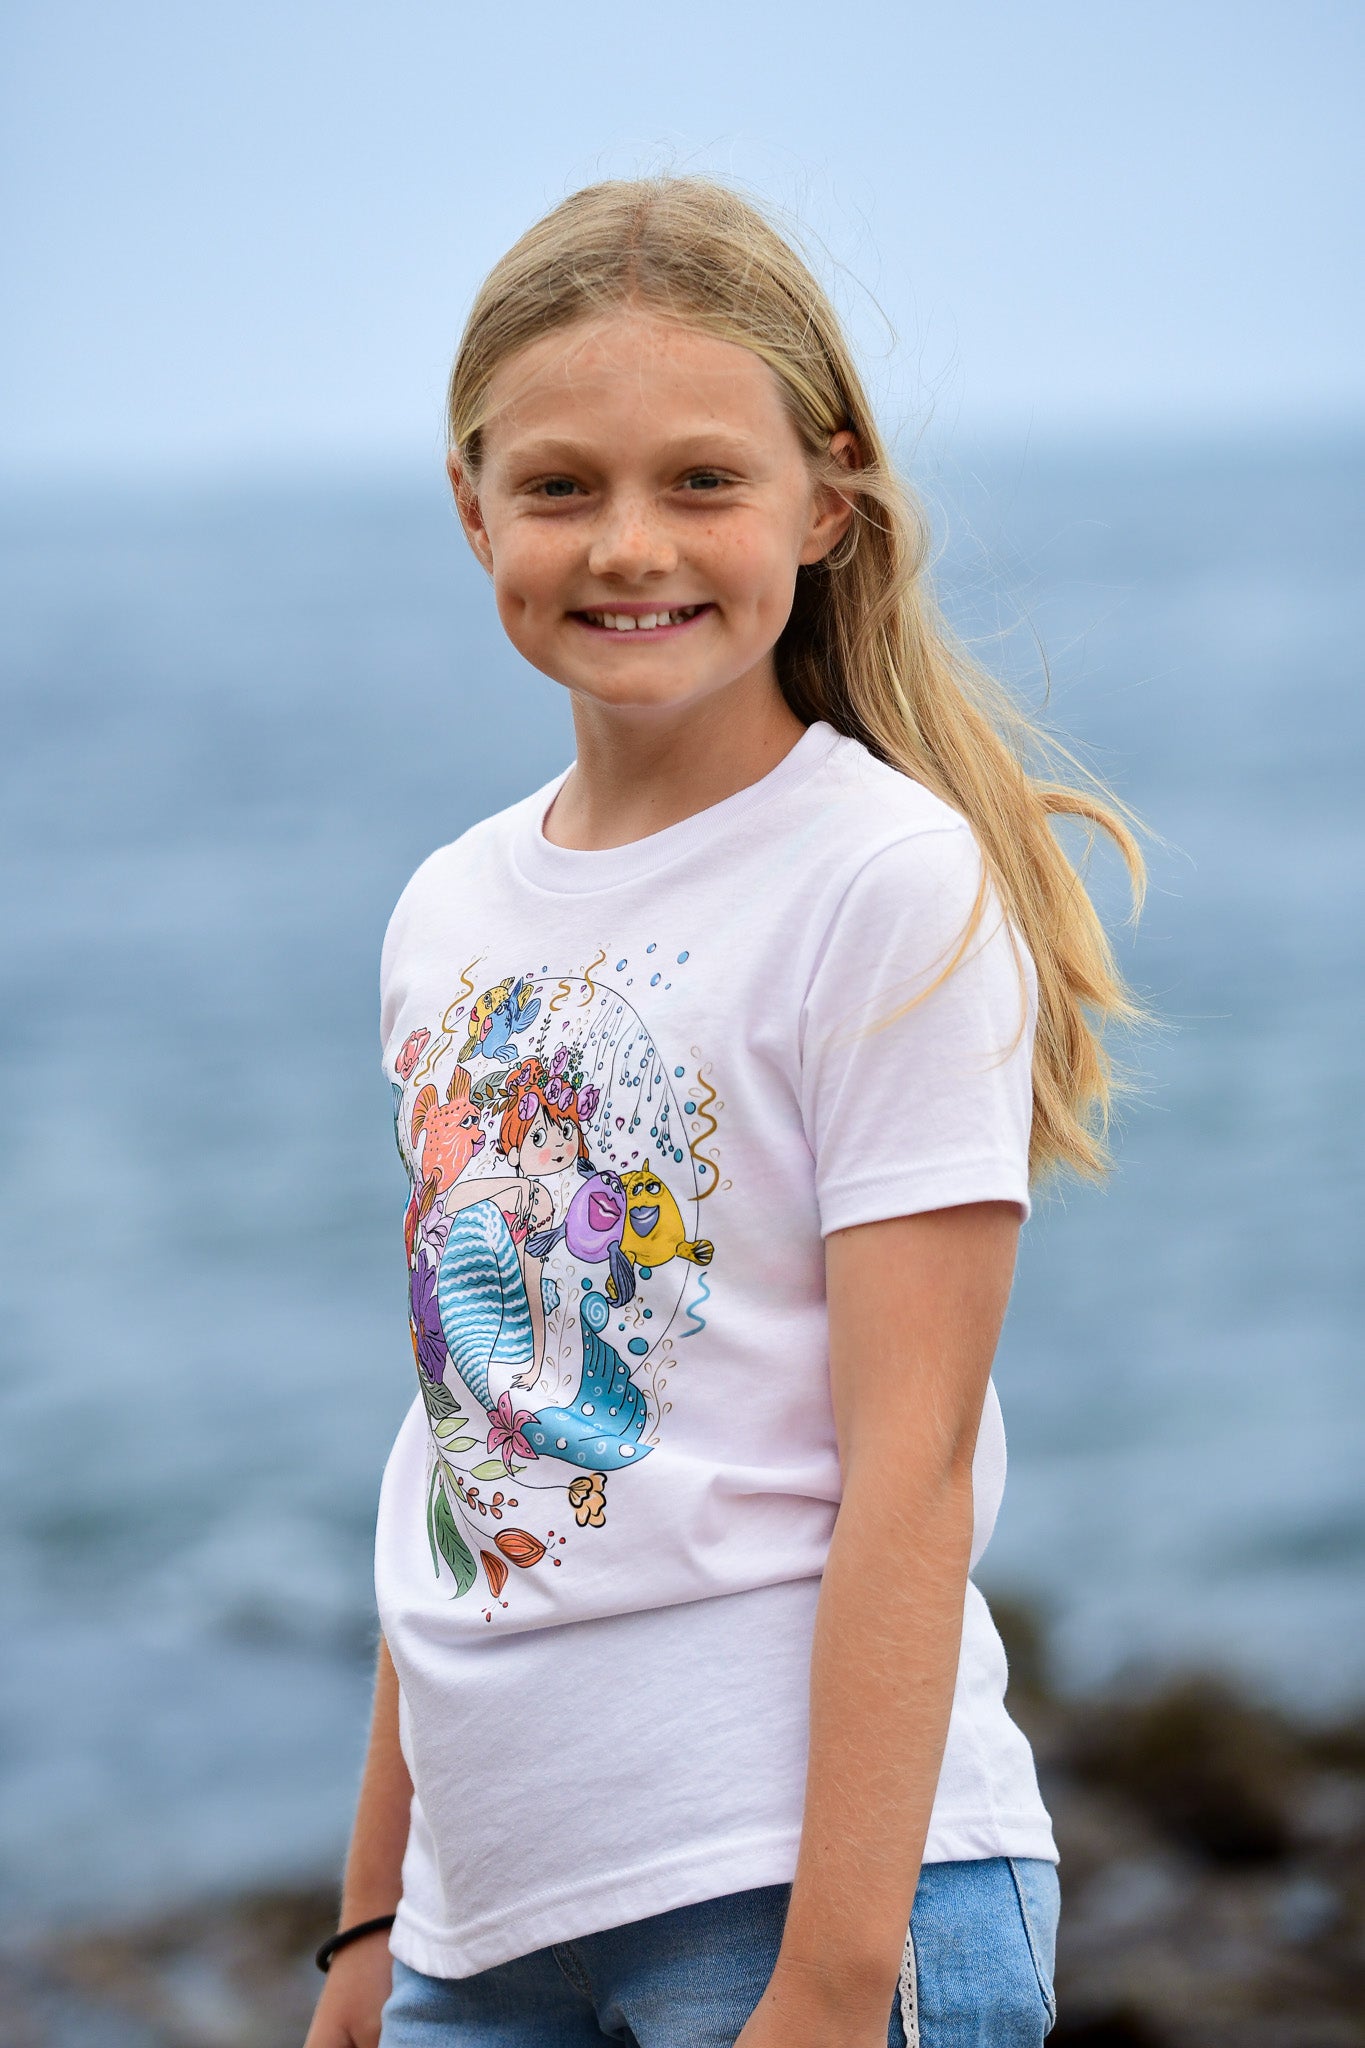 Mermaid graphic tee for girls. red headed mermaid and her sea creatures friends hand-drawn illustration t-shirt . Made in Southern California